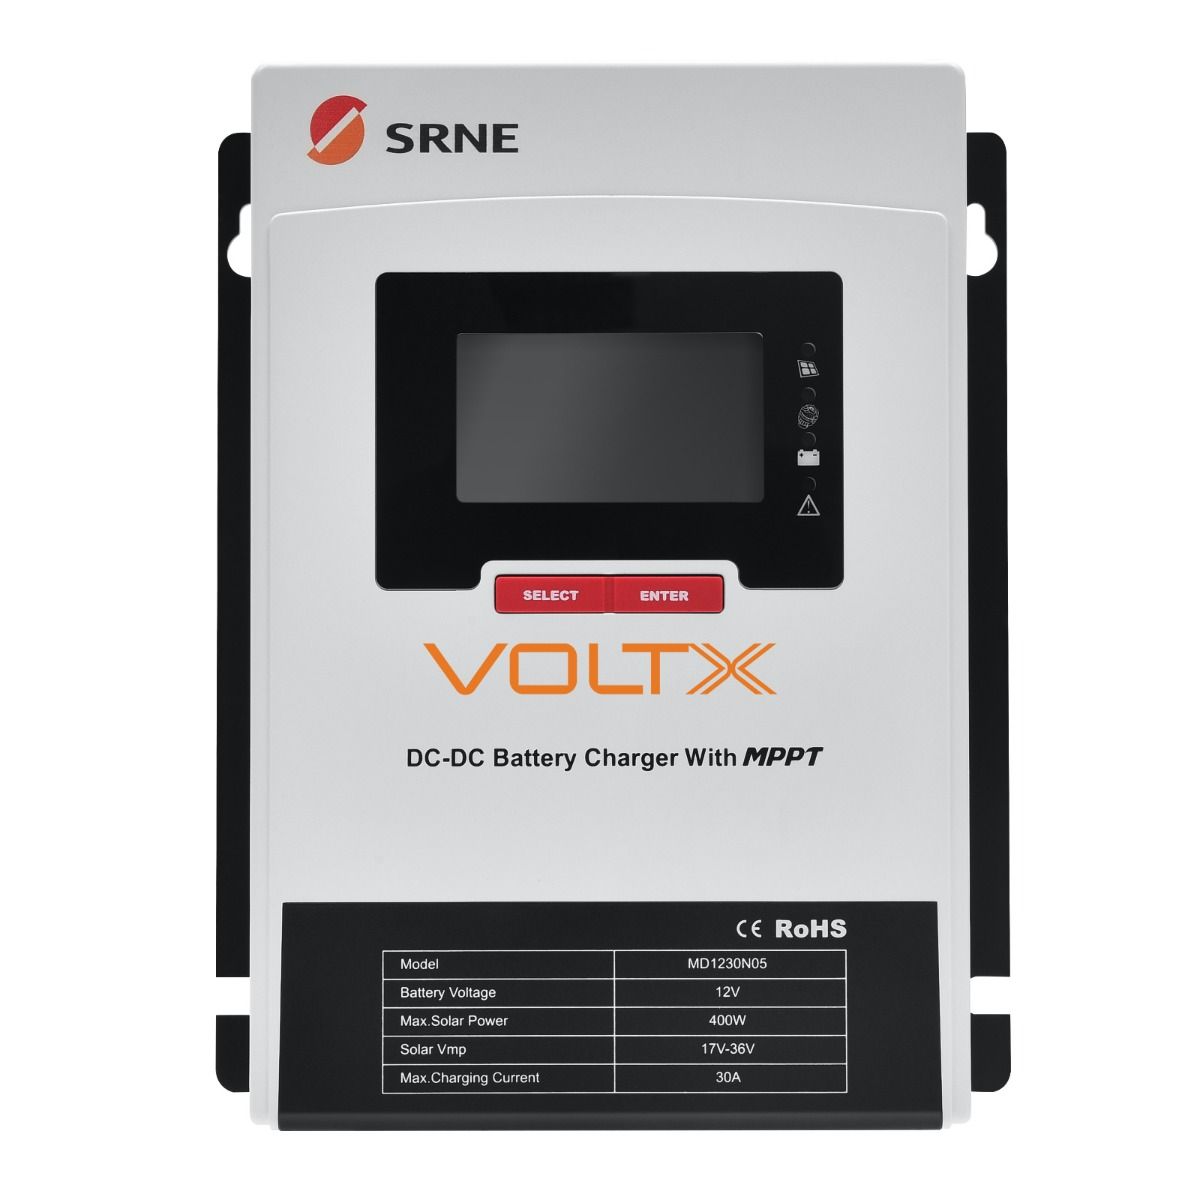 VoltX 30A MPPT DC to DC Lithium Battery Charger